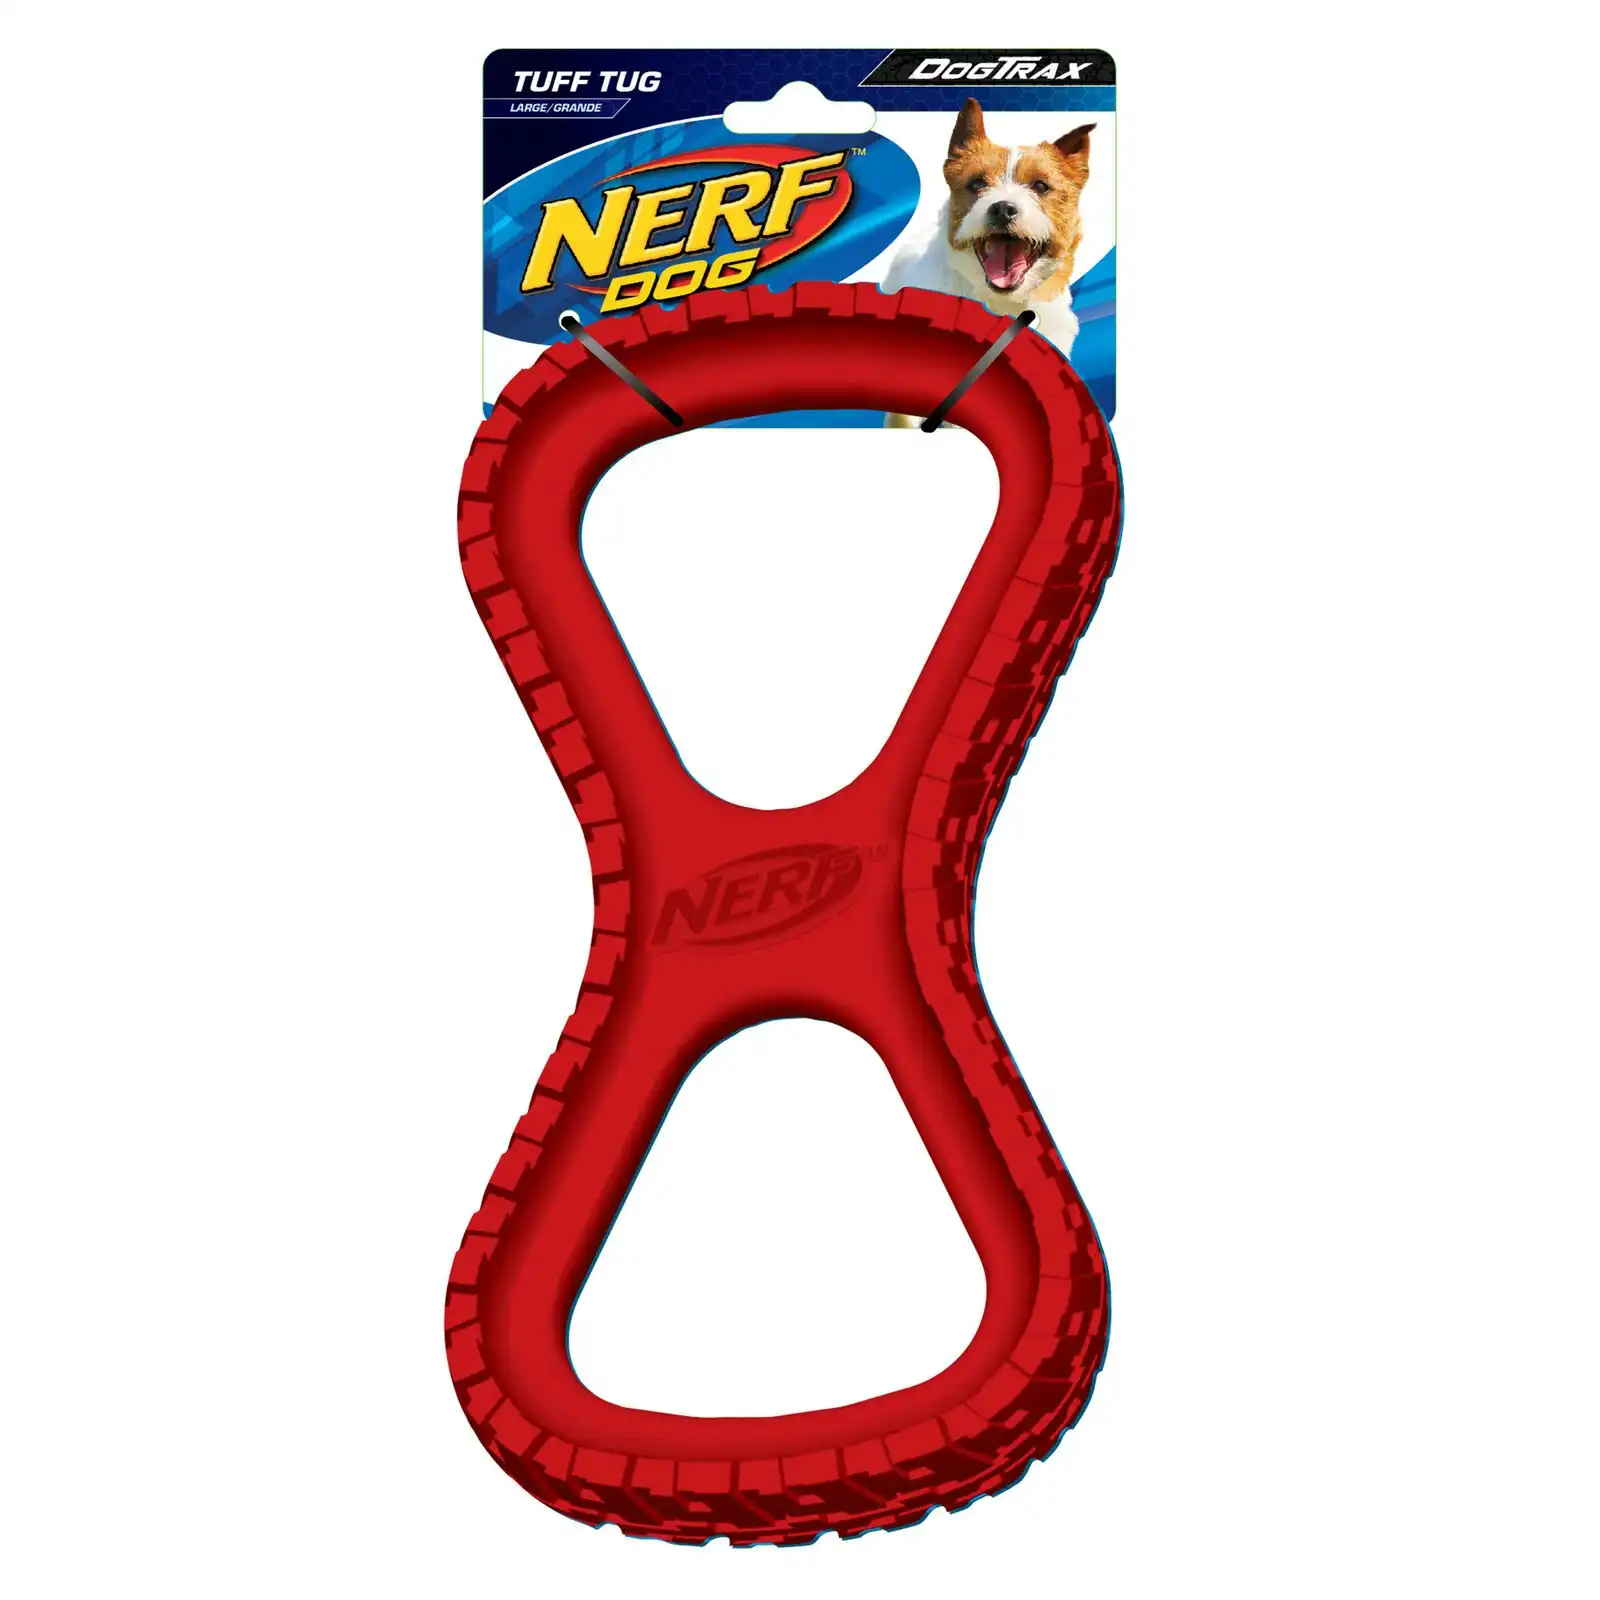 Nerf Dog 10" Large Tire Infinity Tug Red Rubber Pet Toy For Medium/Large Dogs